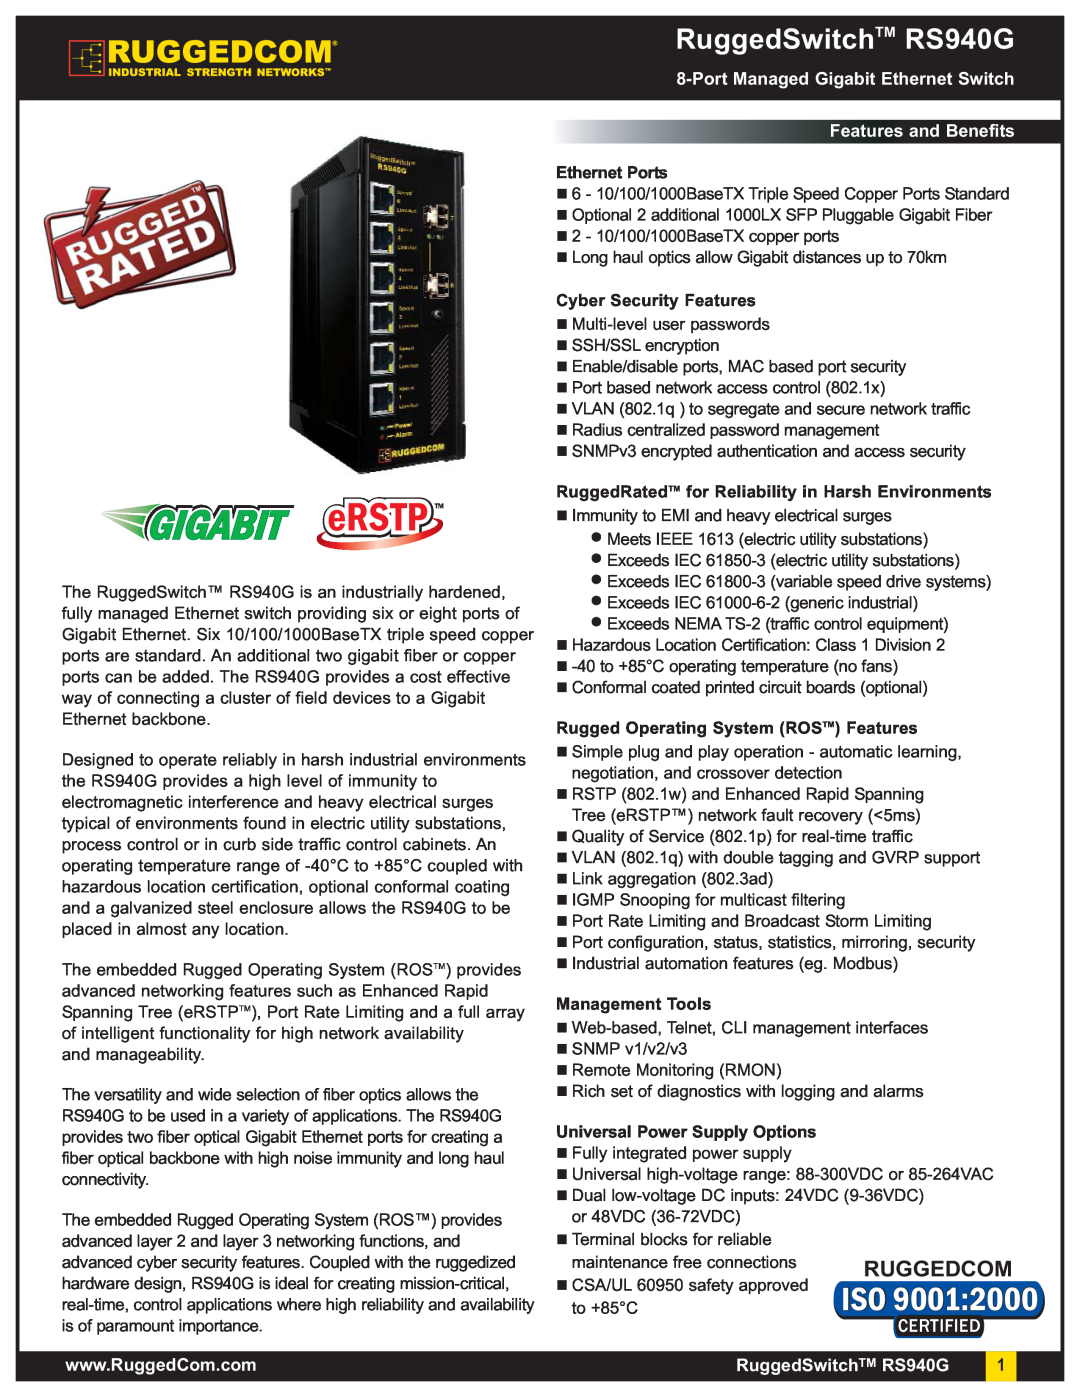 RuggedCom manual RuggedSwitchTM RS940G, Port Managed Gigabit Ethernet Switch Features and Benefits, Ethernet Ports 